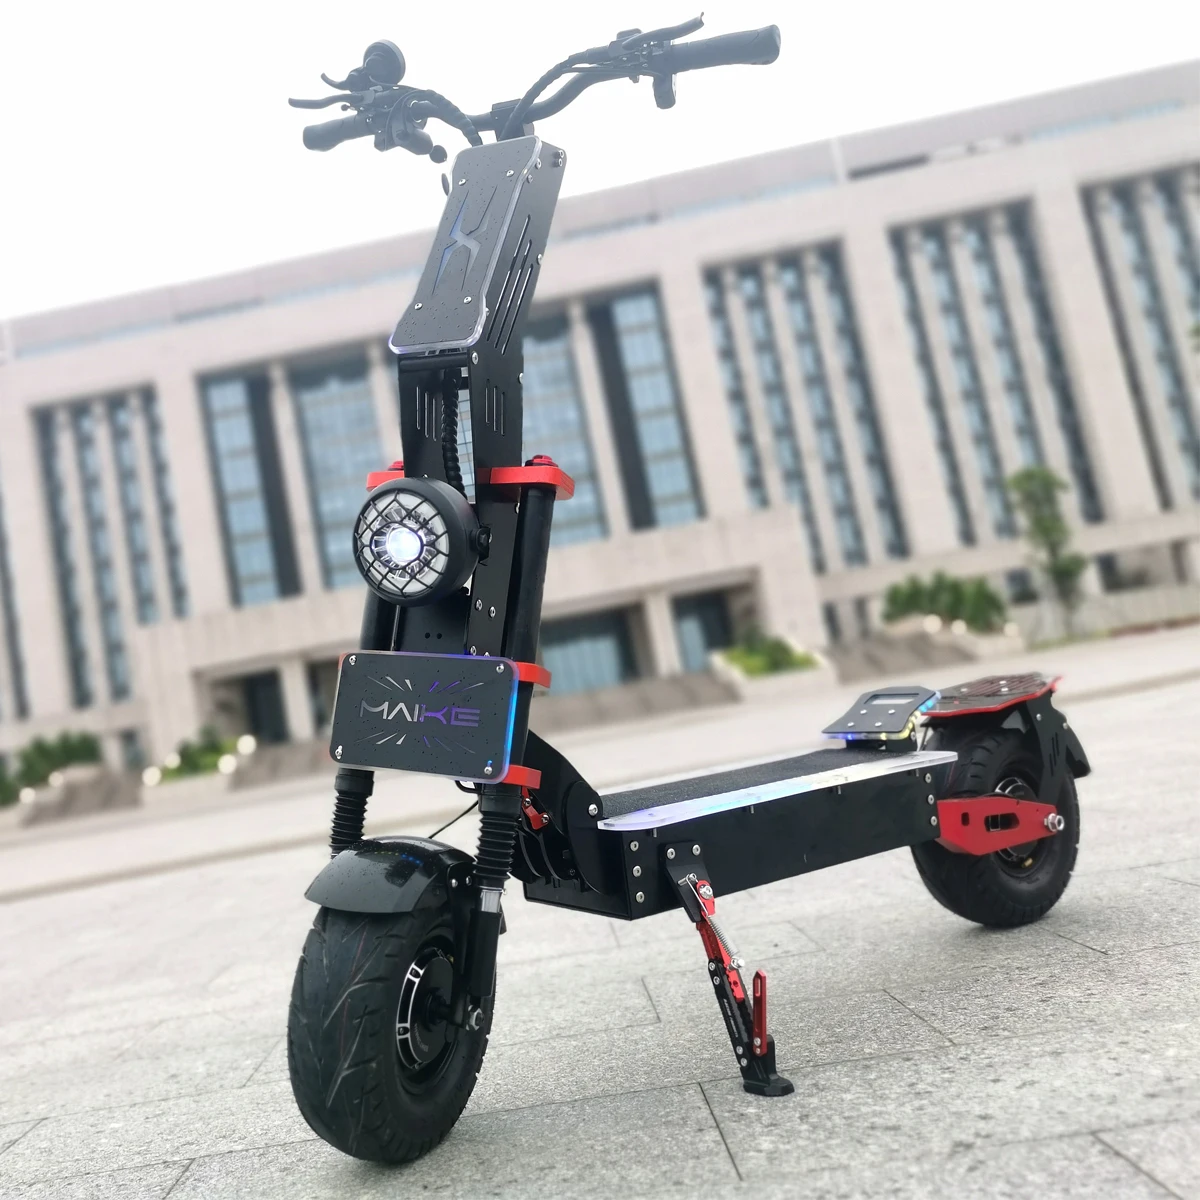 

Factory Cheap Price Maike MKX 13 inch fat wheel scooter high speed 100kmh off road dual hub 8000 watt electric scooter